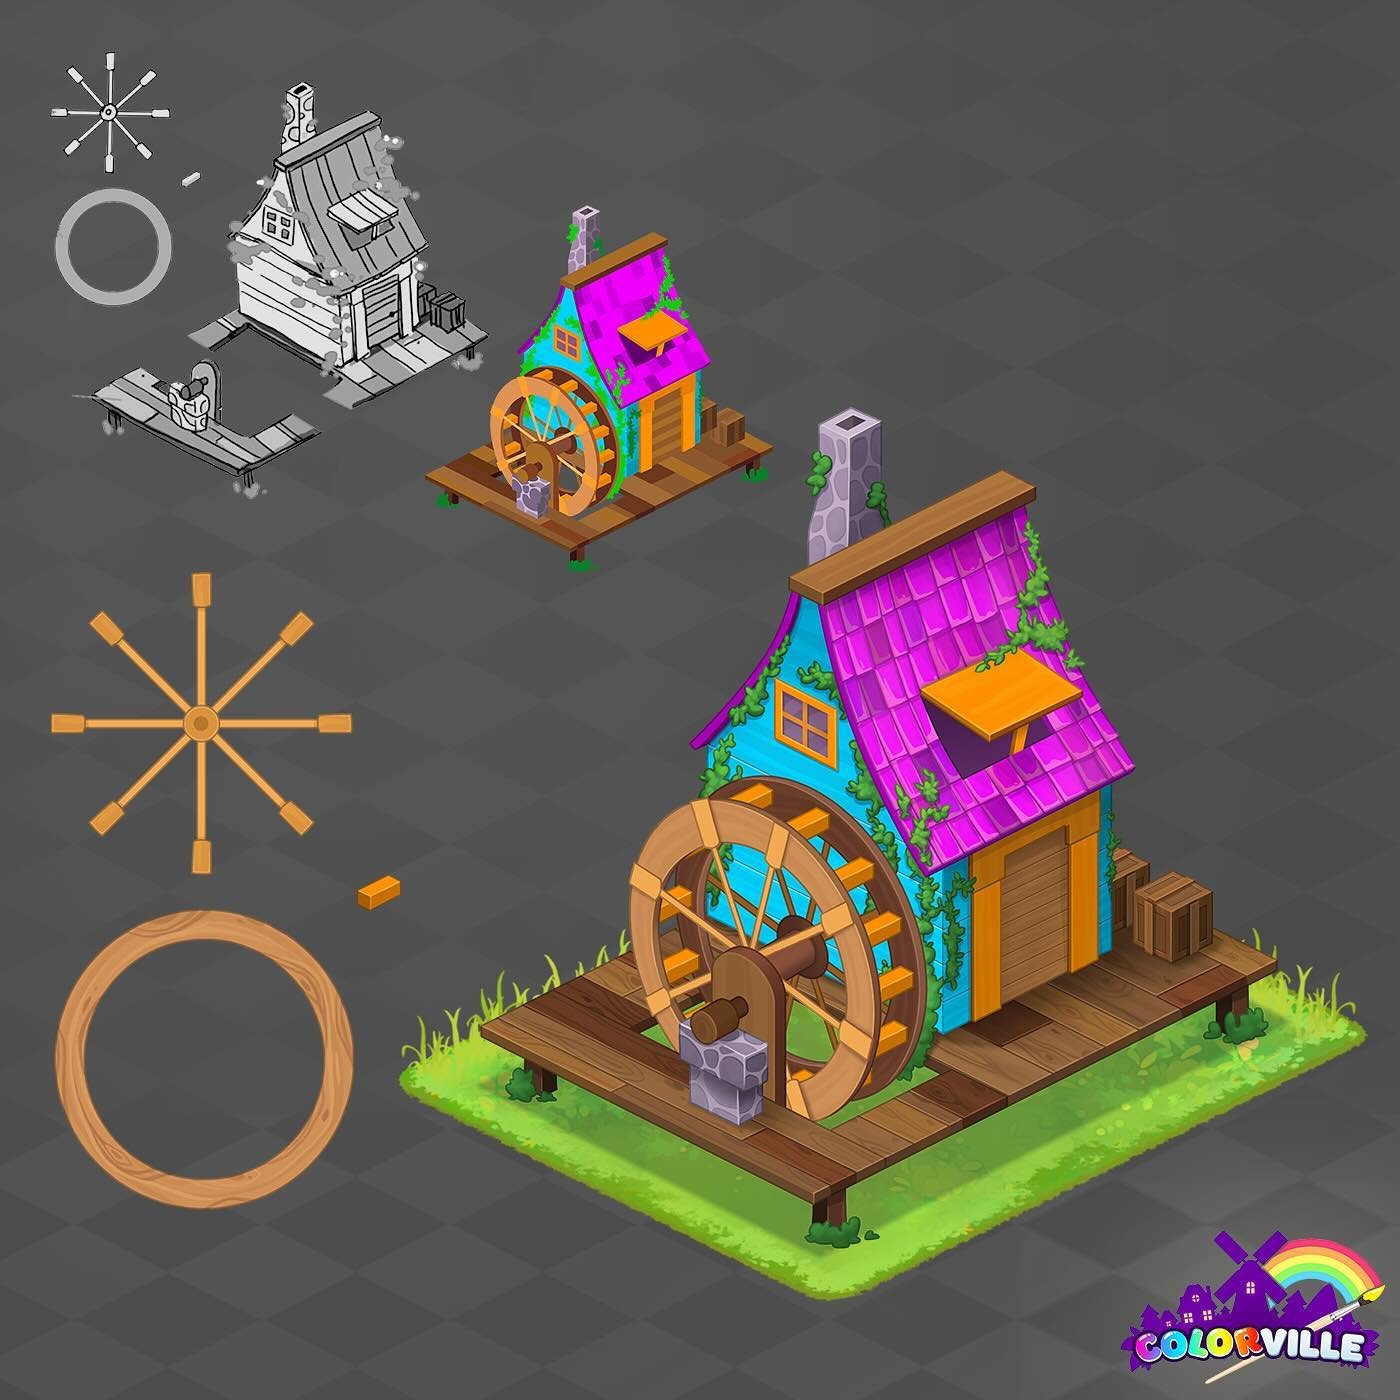 Watermill, 3x4 item for &lsquo;Colorville&rsquo; 🎨
Each asset had a rendered version + a vector version (&lsquo;color by number&rsquo;) so the player could change the palettes!
.
#isometricart #gameart #2dart #mobilegame #cozygame